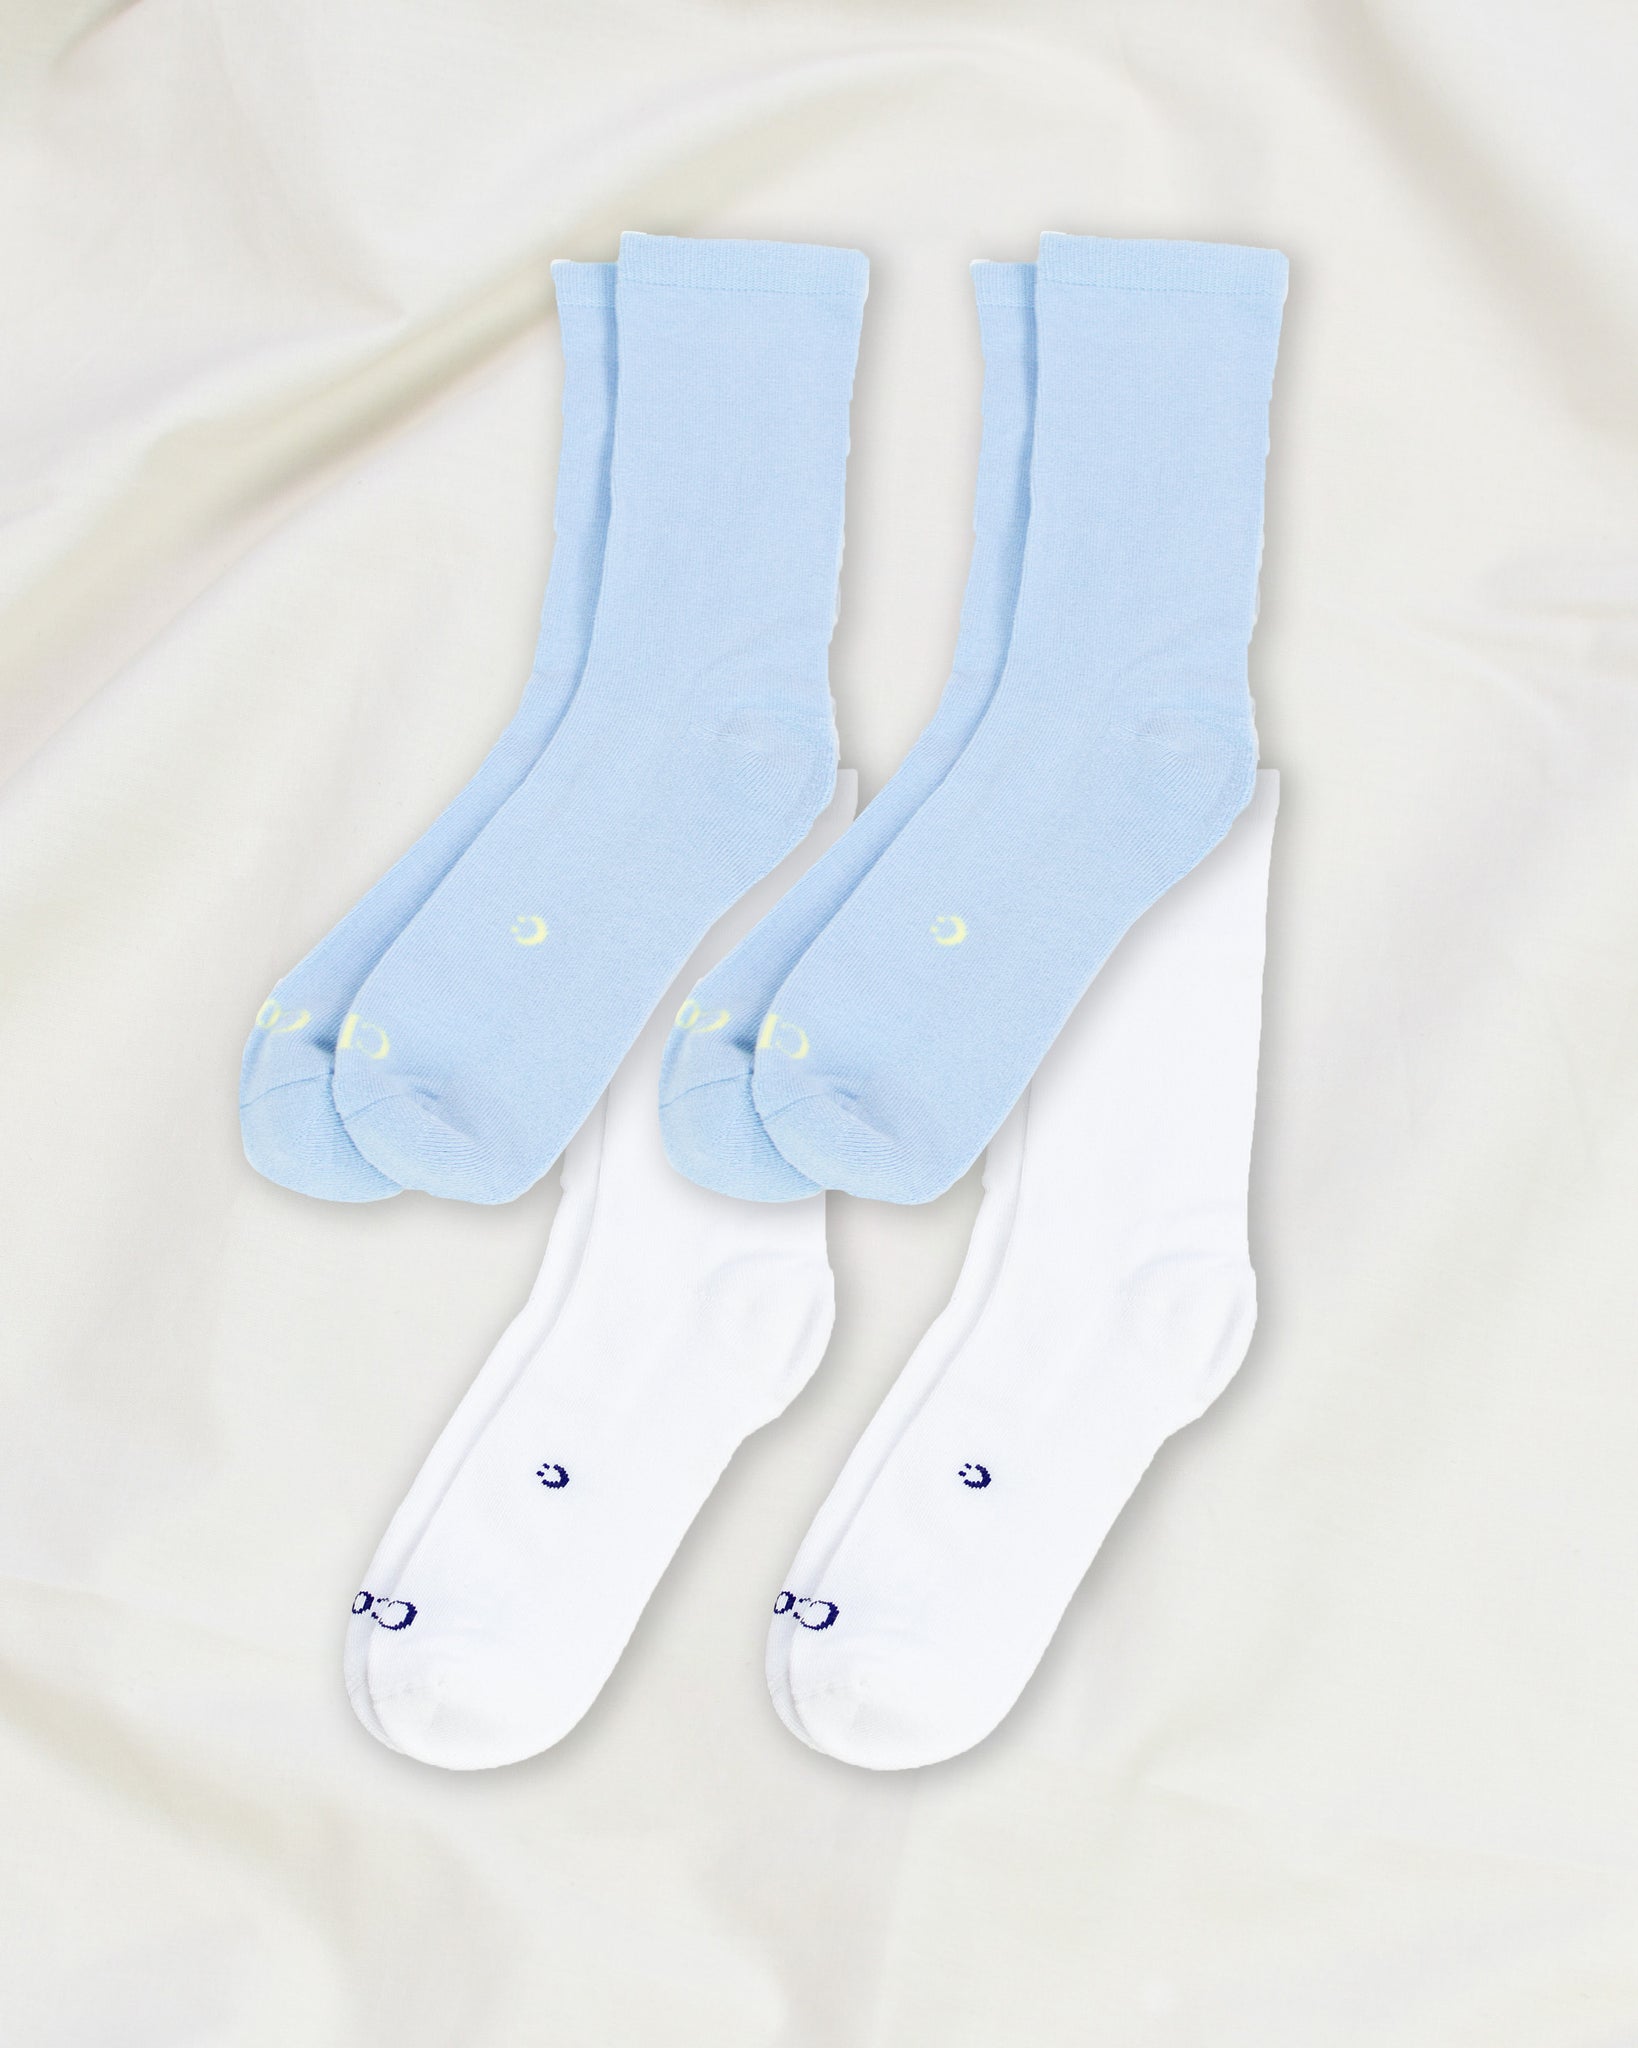 Everyday Crew Seamless Feel Sock 4 Pack (Adults) - Icicle/White